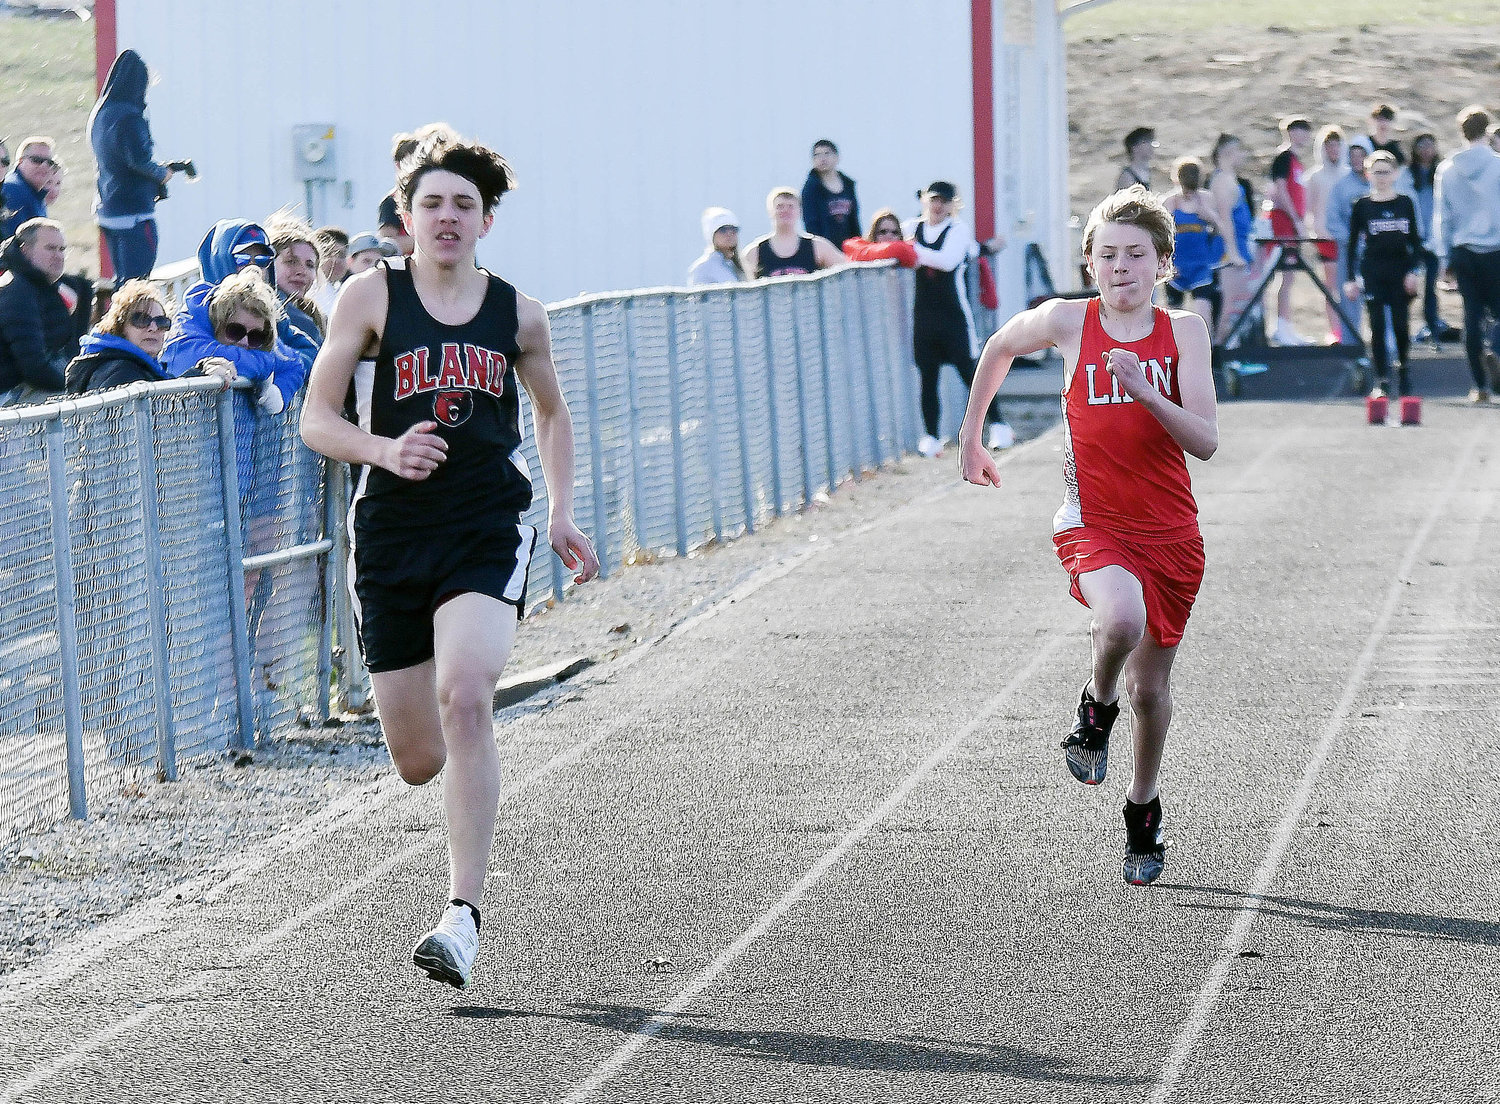 Brice Robertson (left) sprints down the track for Bland’s Bears in the 100-meter dash during a season-opening quad track meet Monday at Linn High School.